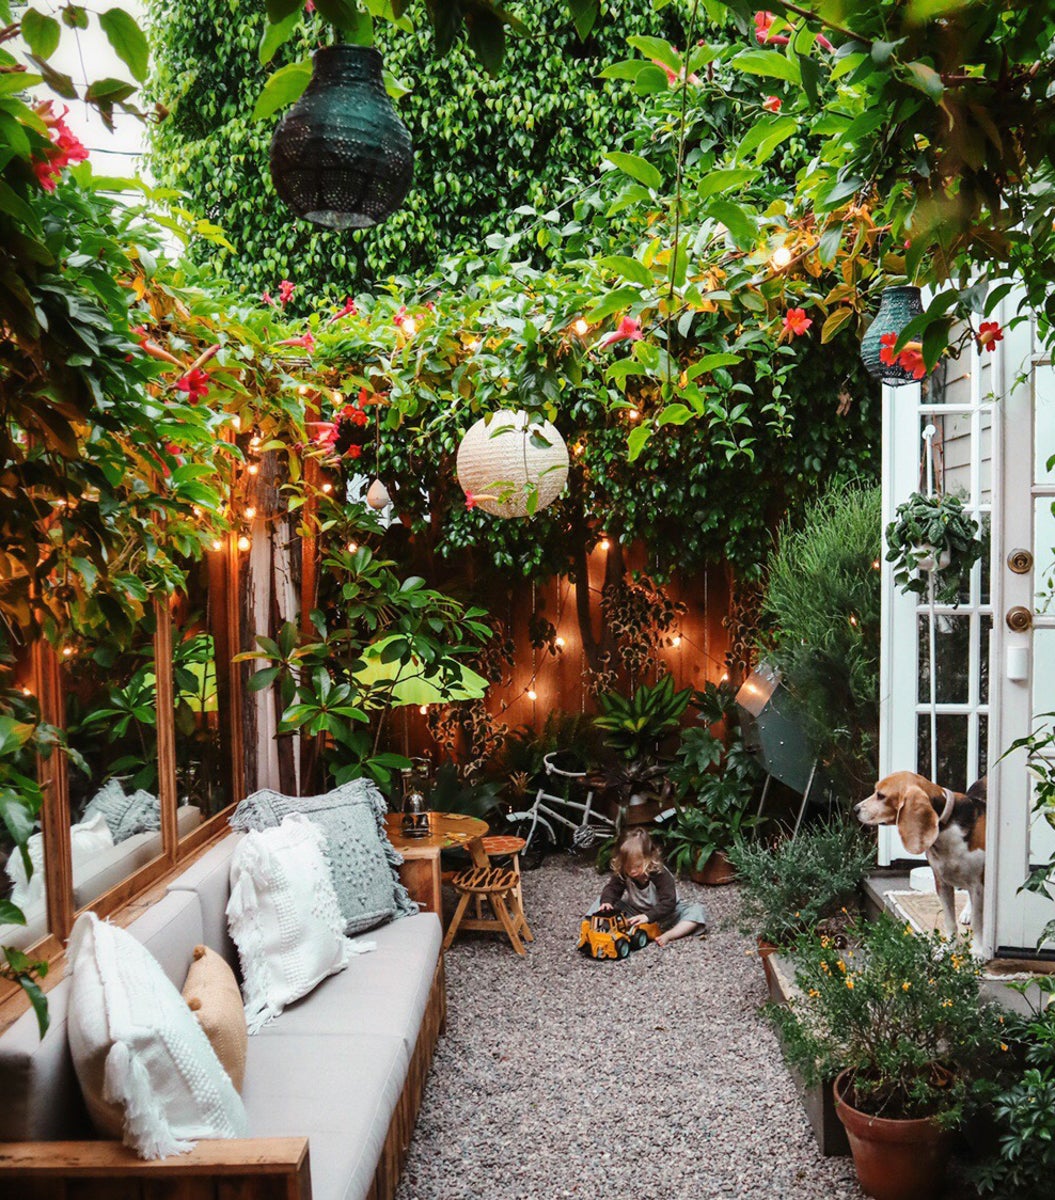 The Best Place to Hang Your Backyard String Lights Isn’t Along the Porch